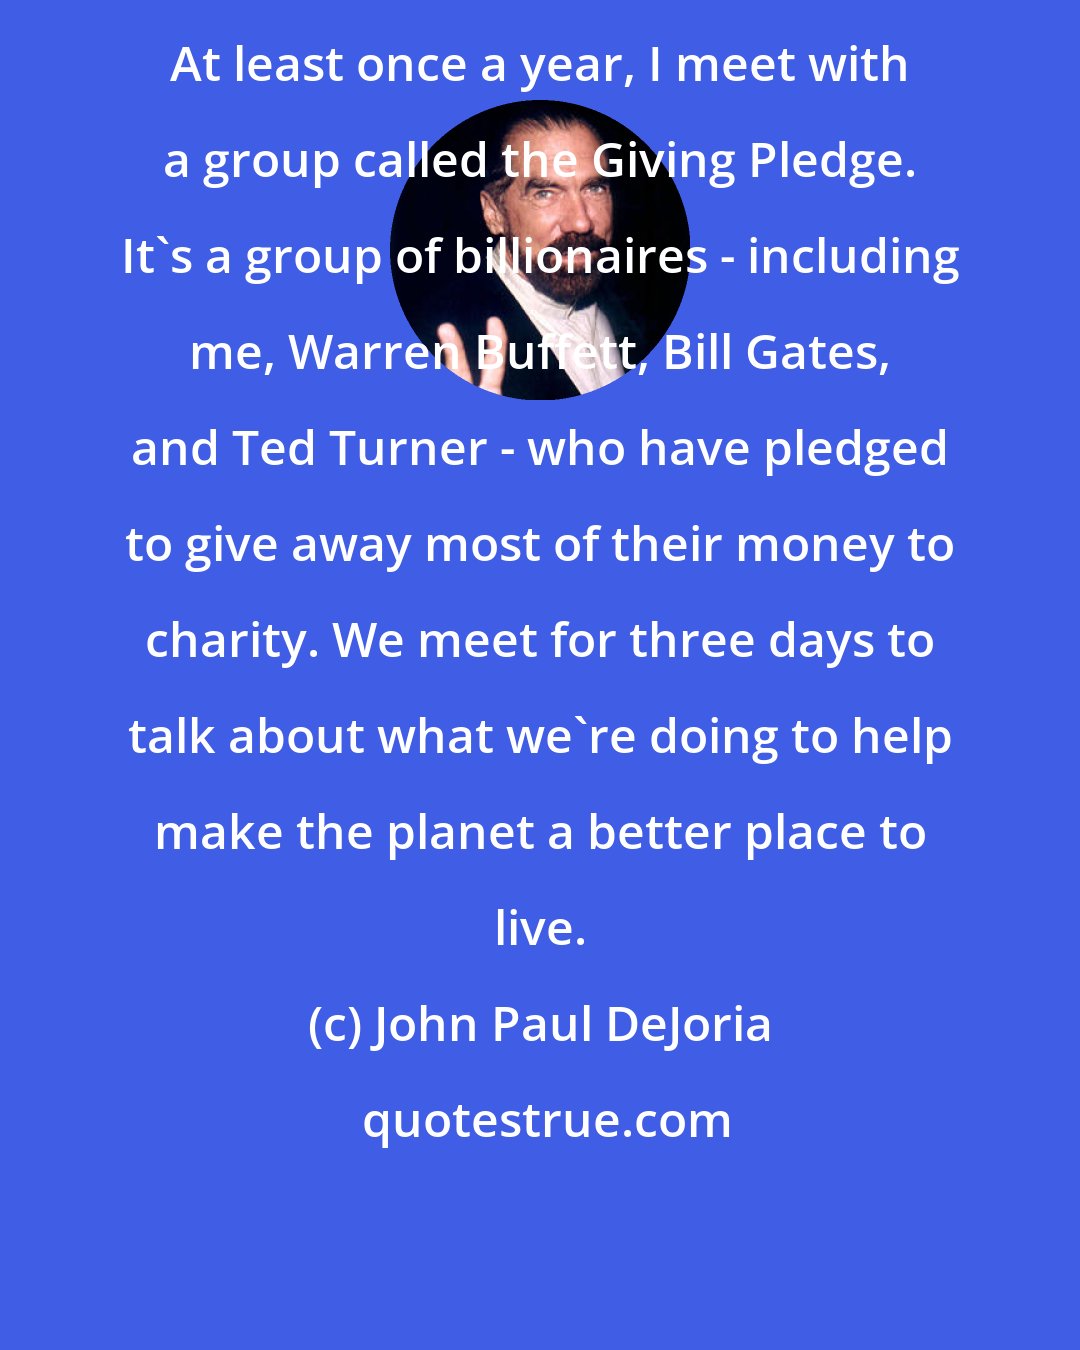 John Paul DeJoria: At least once a year, I meet with a group called the Giving Pledge. It's a group of billionaires - including me, Warren Buffett, Bill Gates, and Ted Turner - who have pledged to give away most of their money to charity. We meet for three days to talk about what we're doing to help make the planet a better place to live.